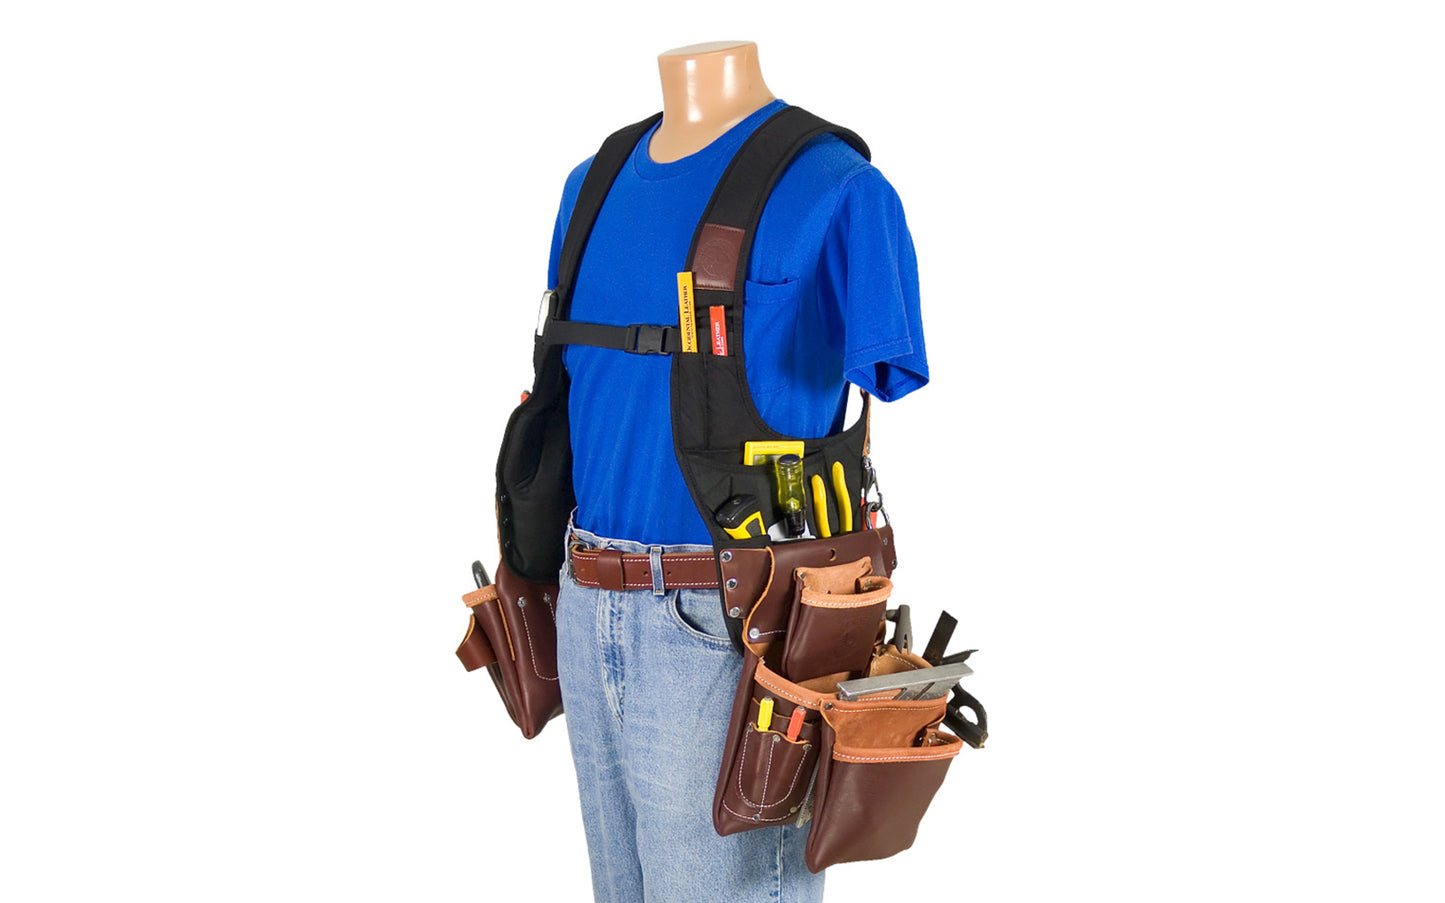 Occidental Leather "SuspendaVest" Leather Package system is a complete tool system with No. 2500 "SuspendaVest" packaged with No. 5060 (2 pouch fastener bag) & No. 5017DB (3 pouch tool bag). 36 total pockets & tool holders. Special tool vest system No. 2550. Industrial nylon material & genuine leather. 759244194401